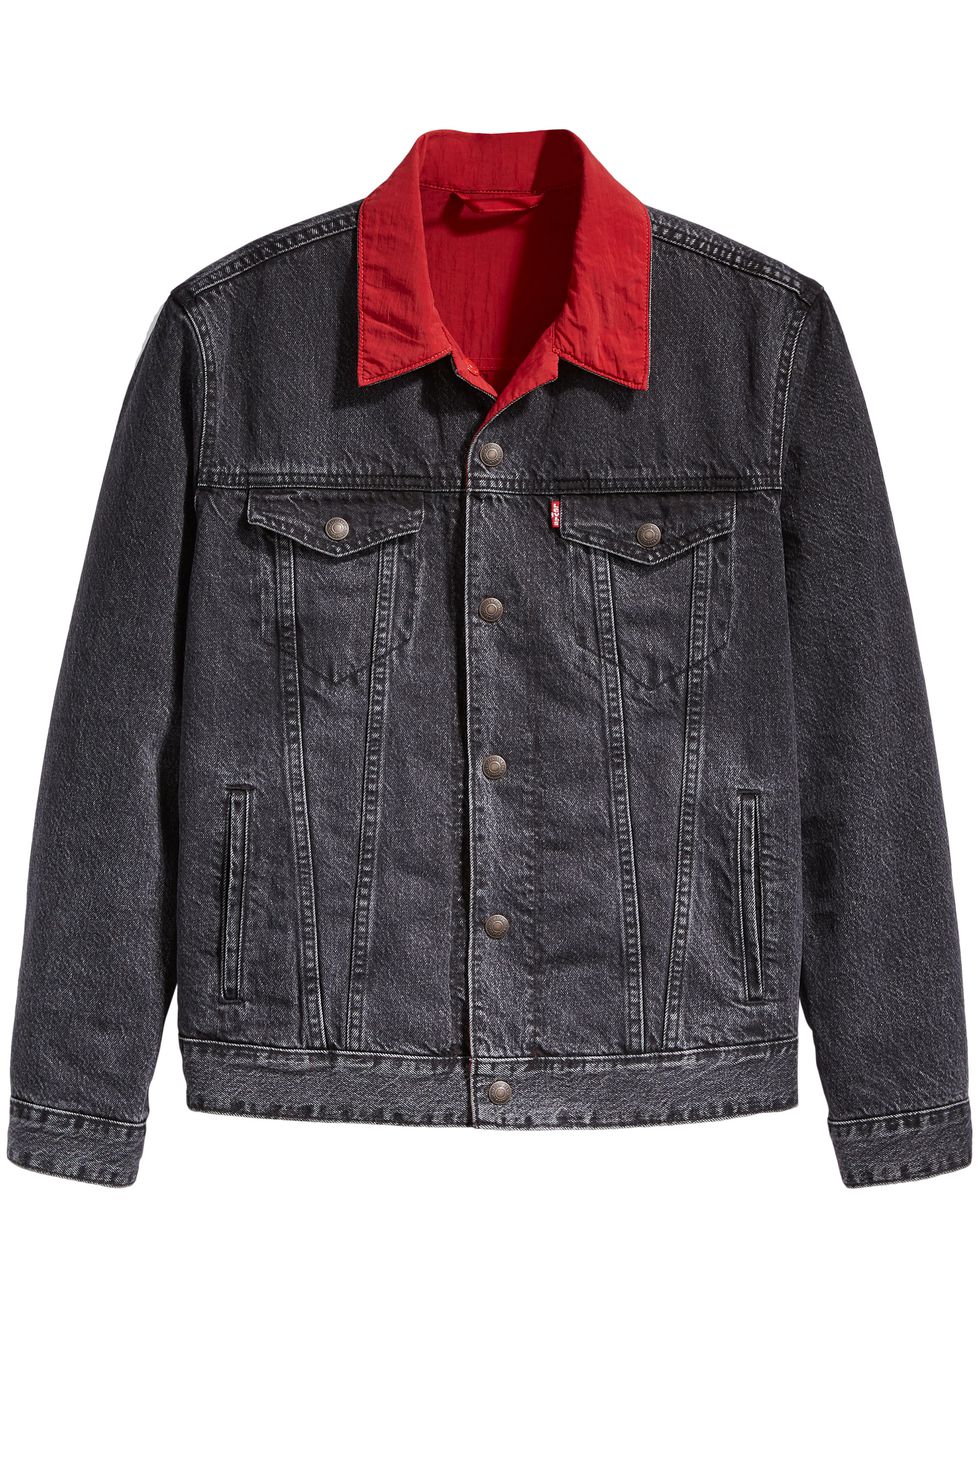 Denim jacket 'Made & Crafted®' collection Levi's   IetpShops BF